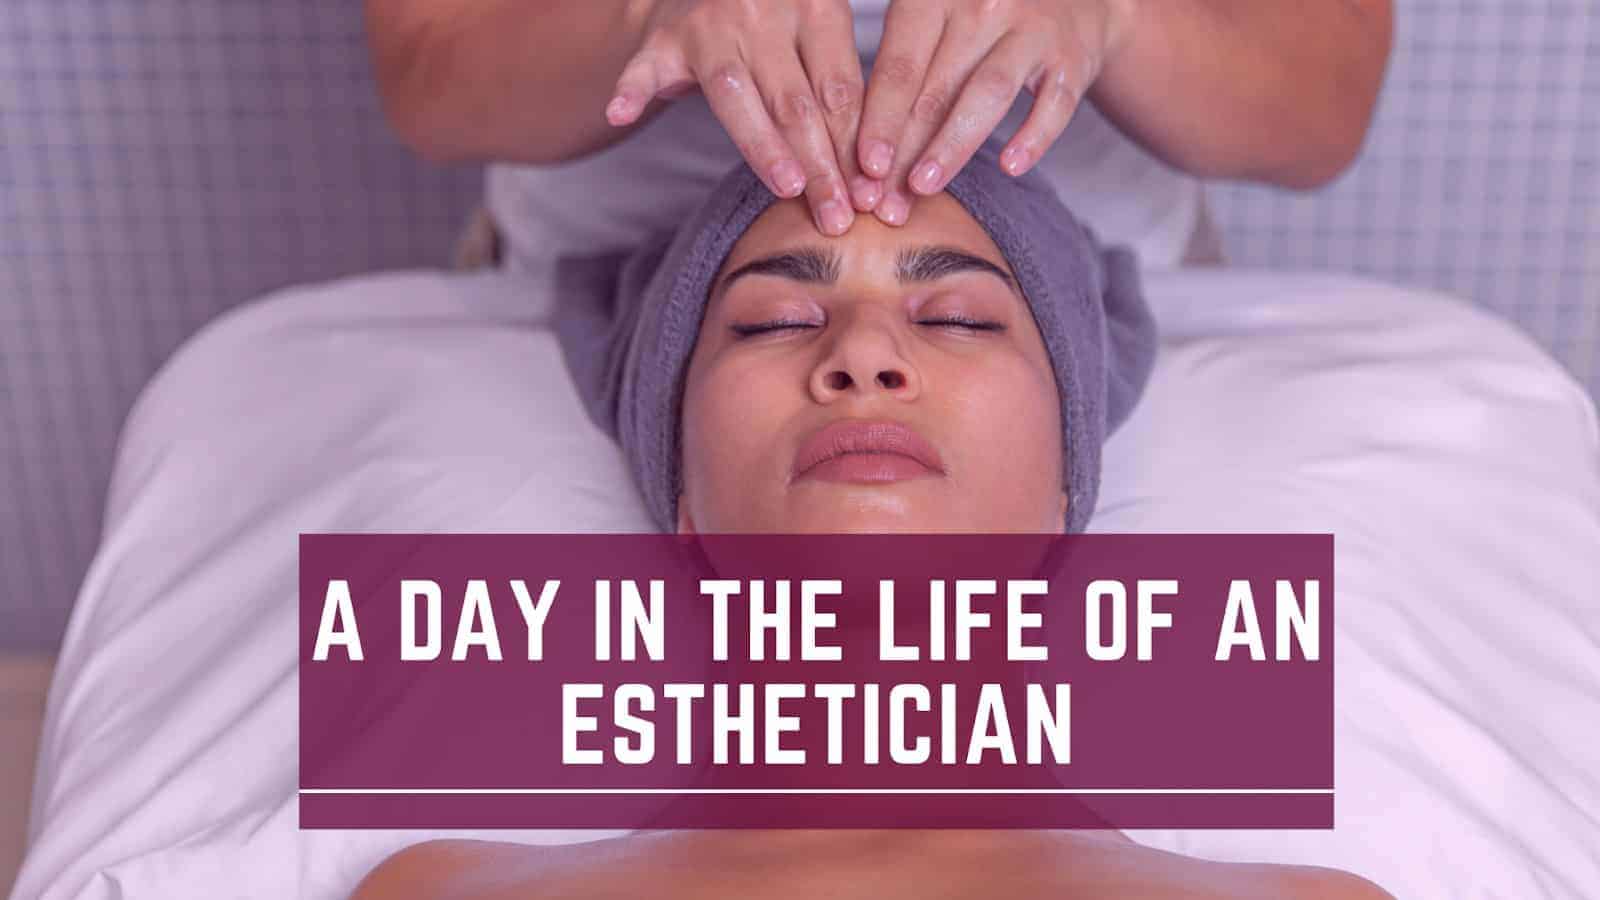 A Day in the Life of an Esthetician